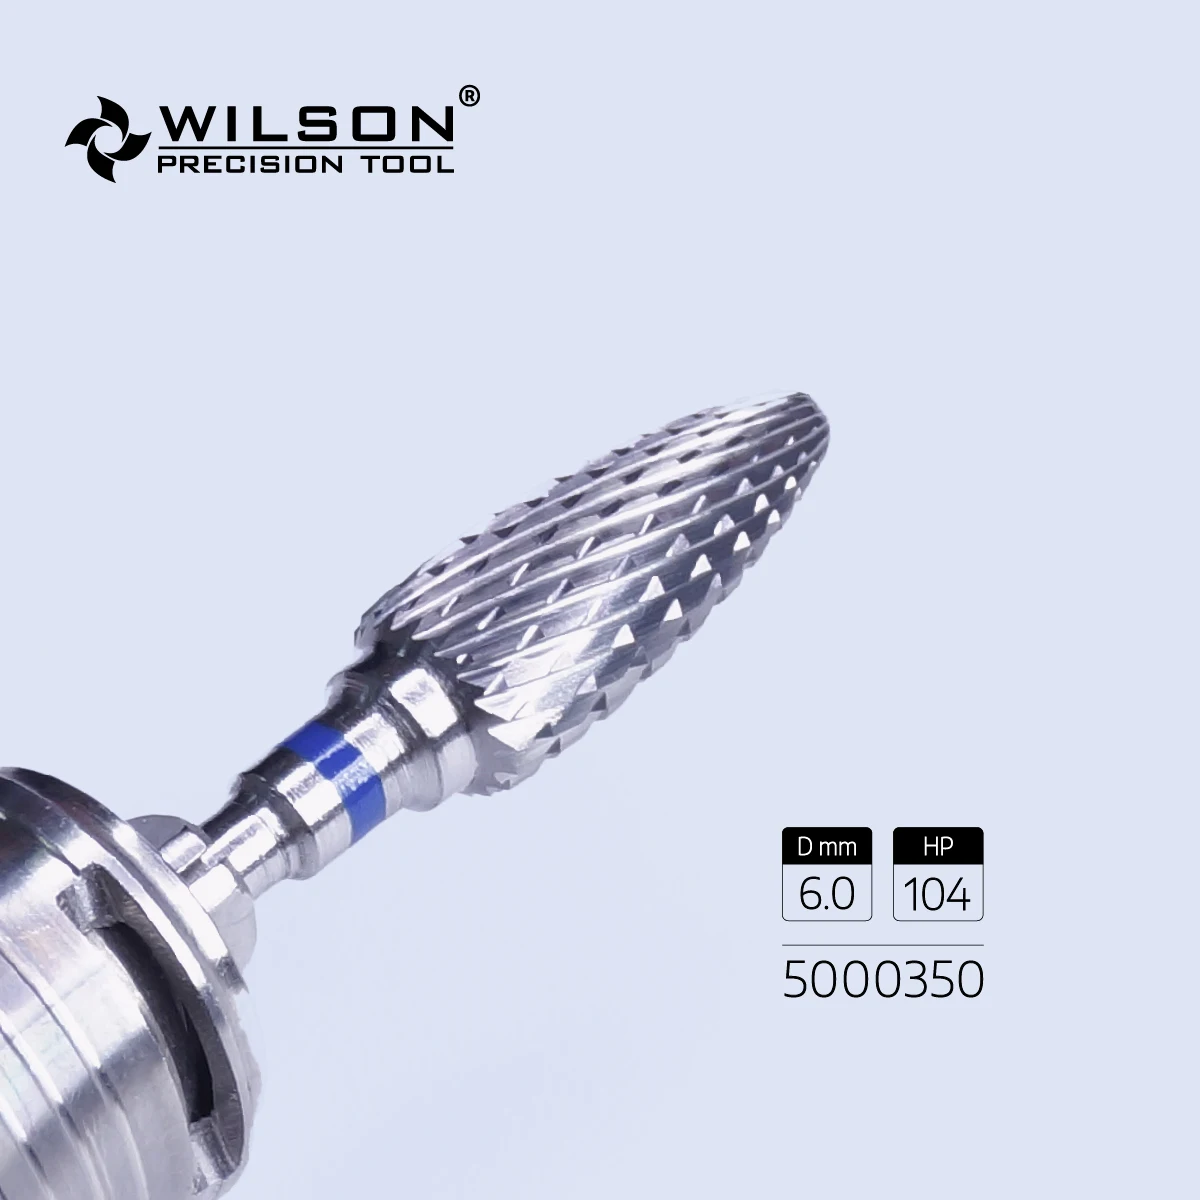 

WILSON PRECISION TOOL 5000350-ISO 275 190 060 Tungsten Carbide Burs For Trimming Plaster/Acrylic/Metal